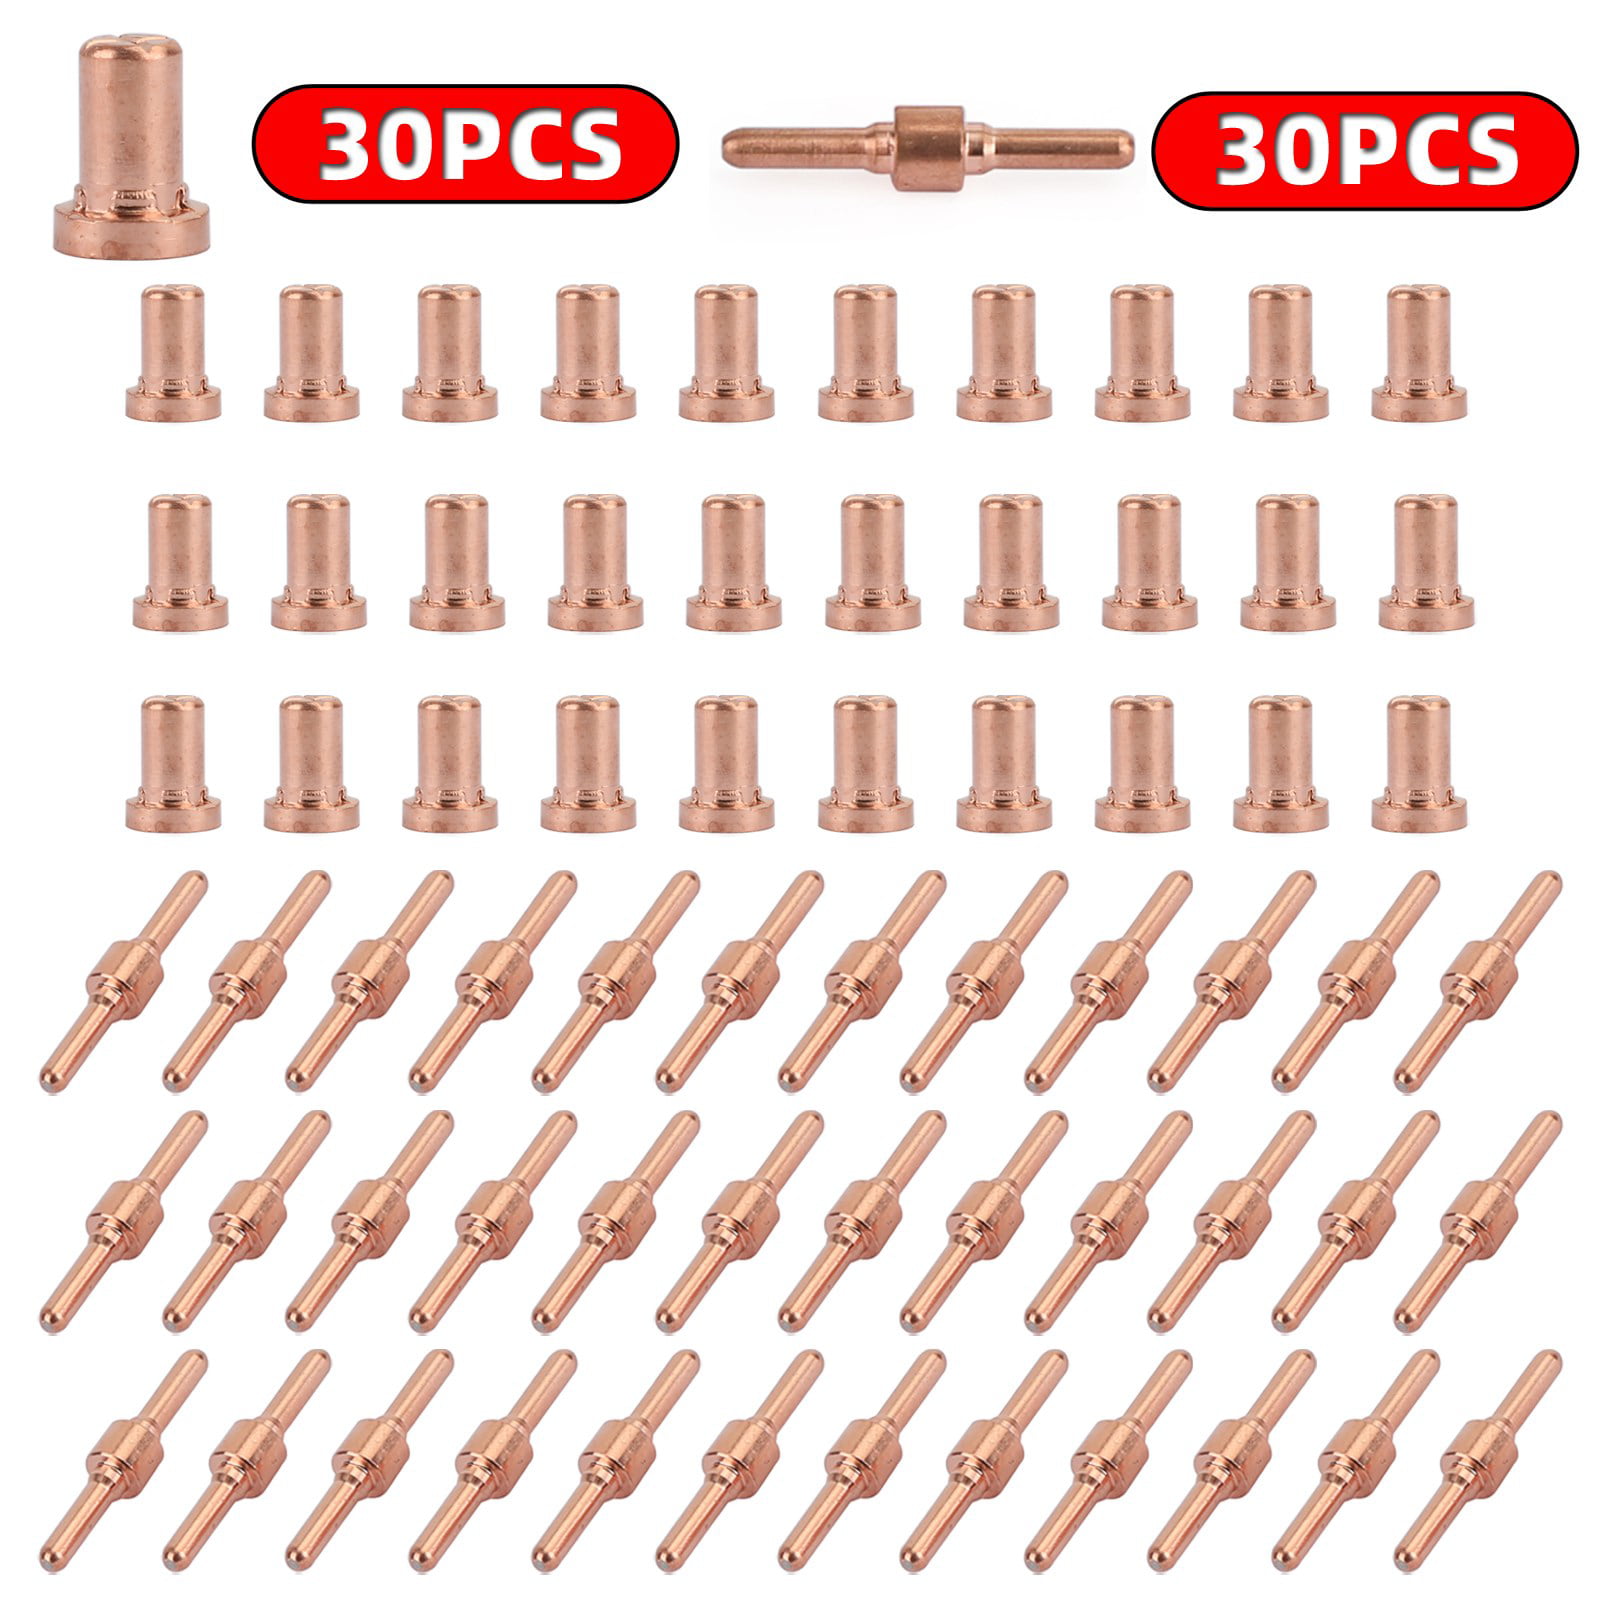 60pcs Plasma Cutting Consumables Cutter Electrode Nozzle Tip Extension New 